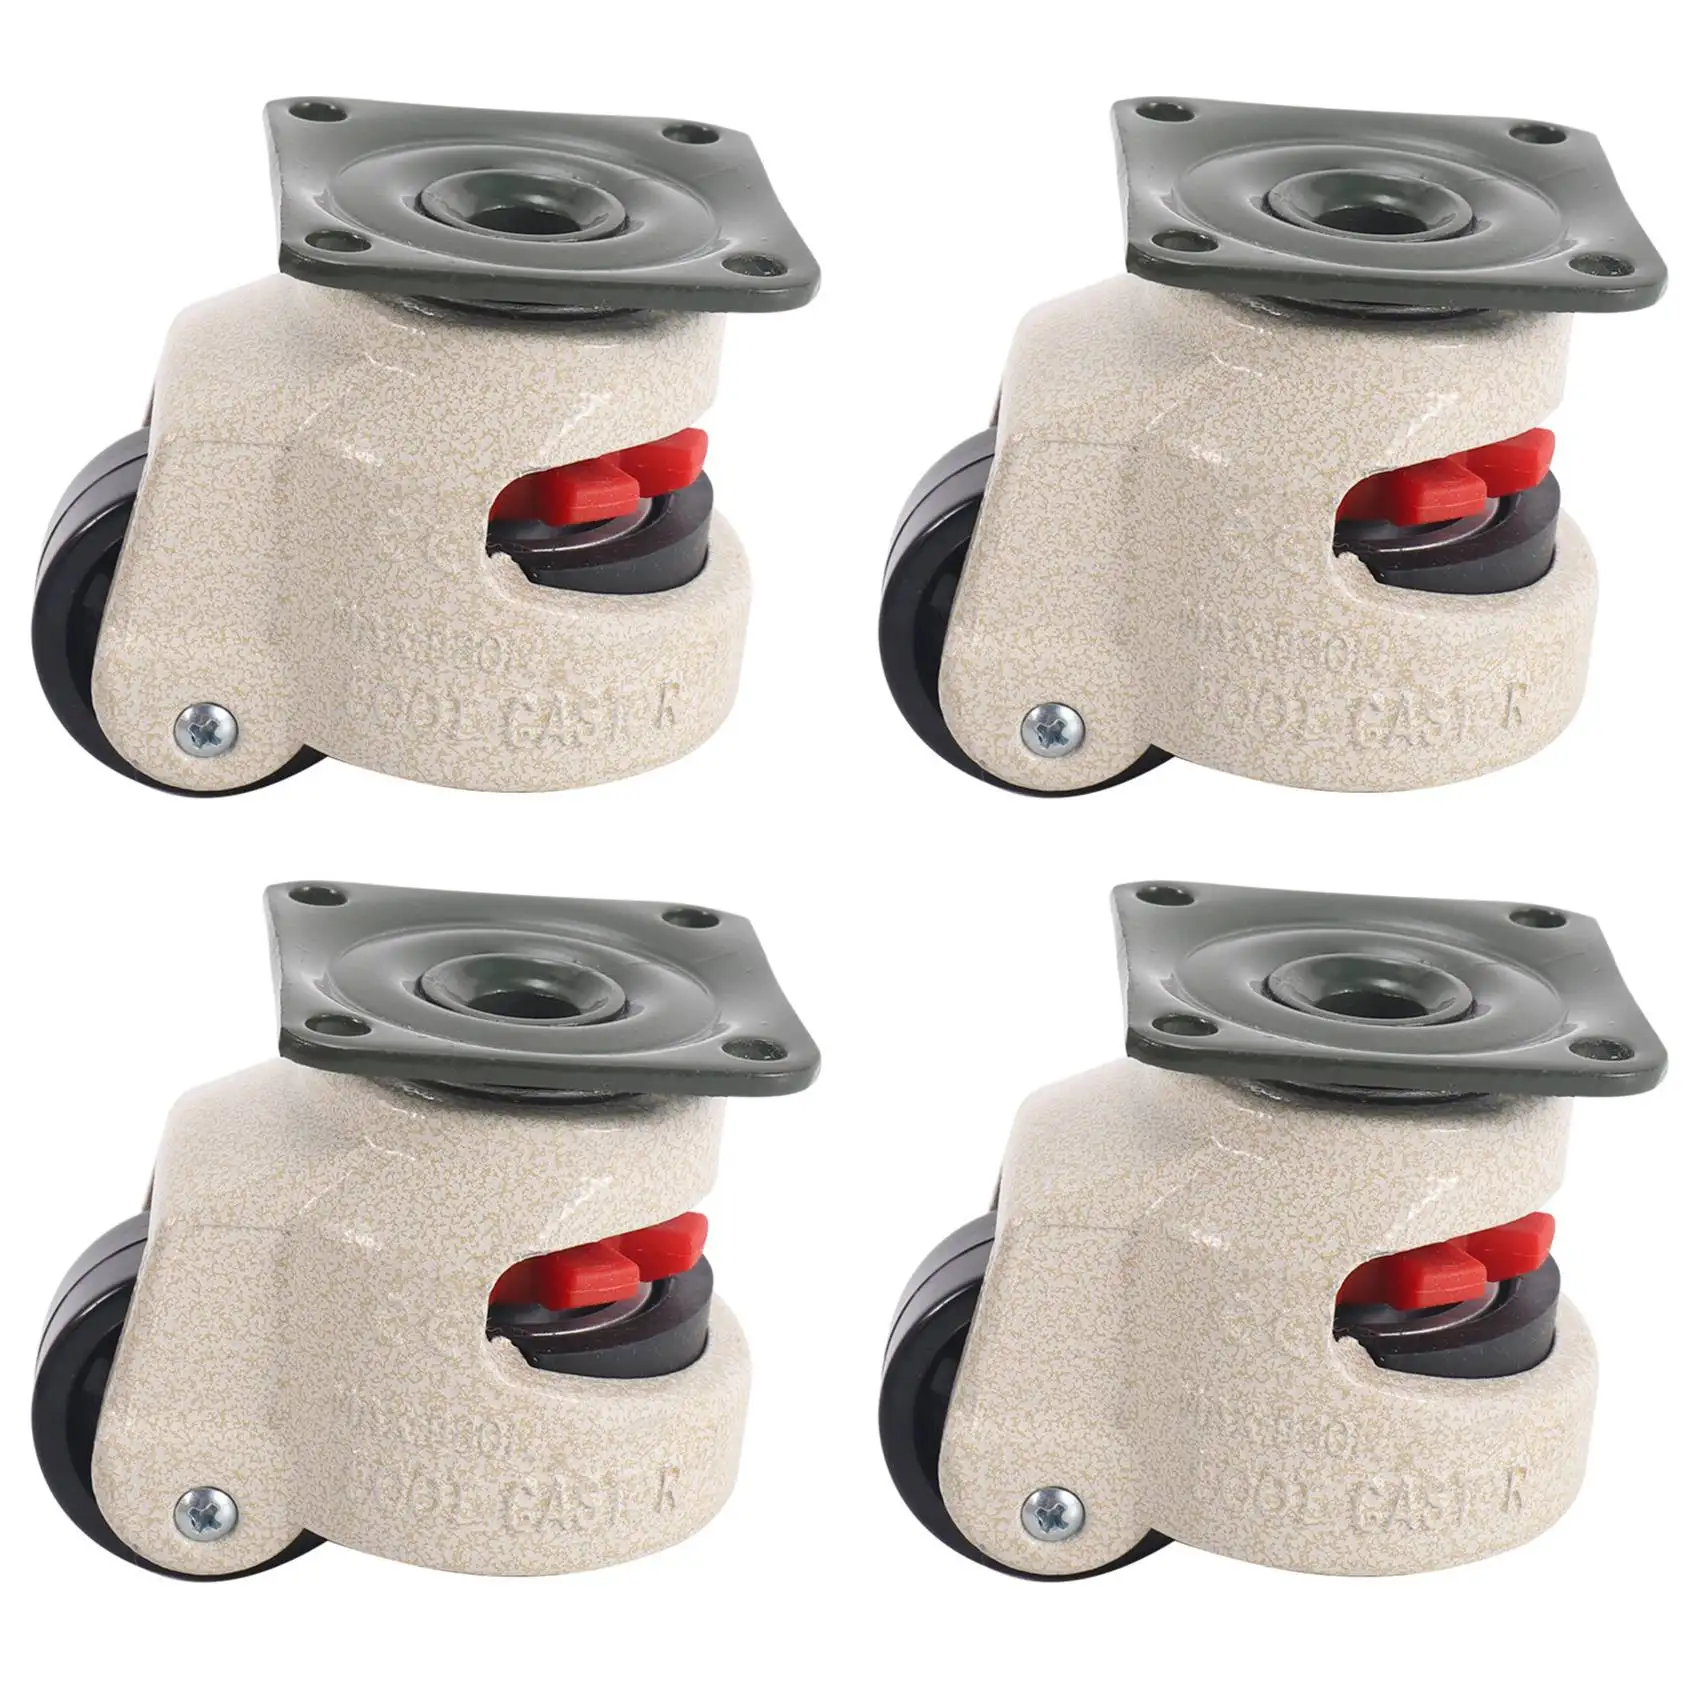 

4 Pcs Retractable Leveling Casters Industrial Machine Swivel Caster Castor Wheel for Office Chair Trolley 330 Lbs Capacity